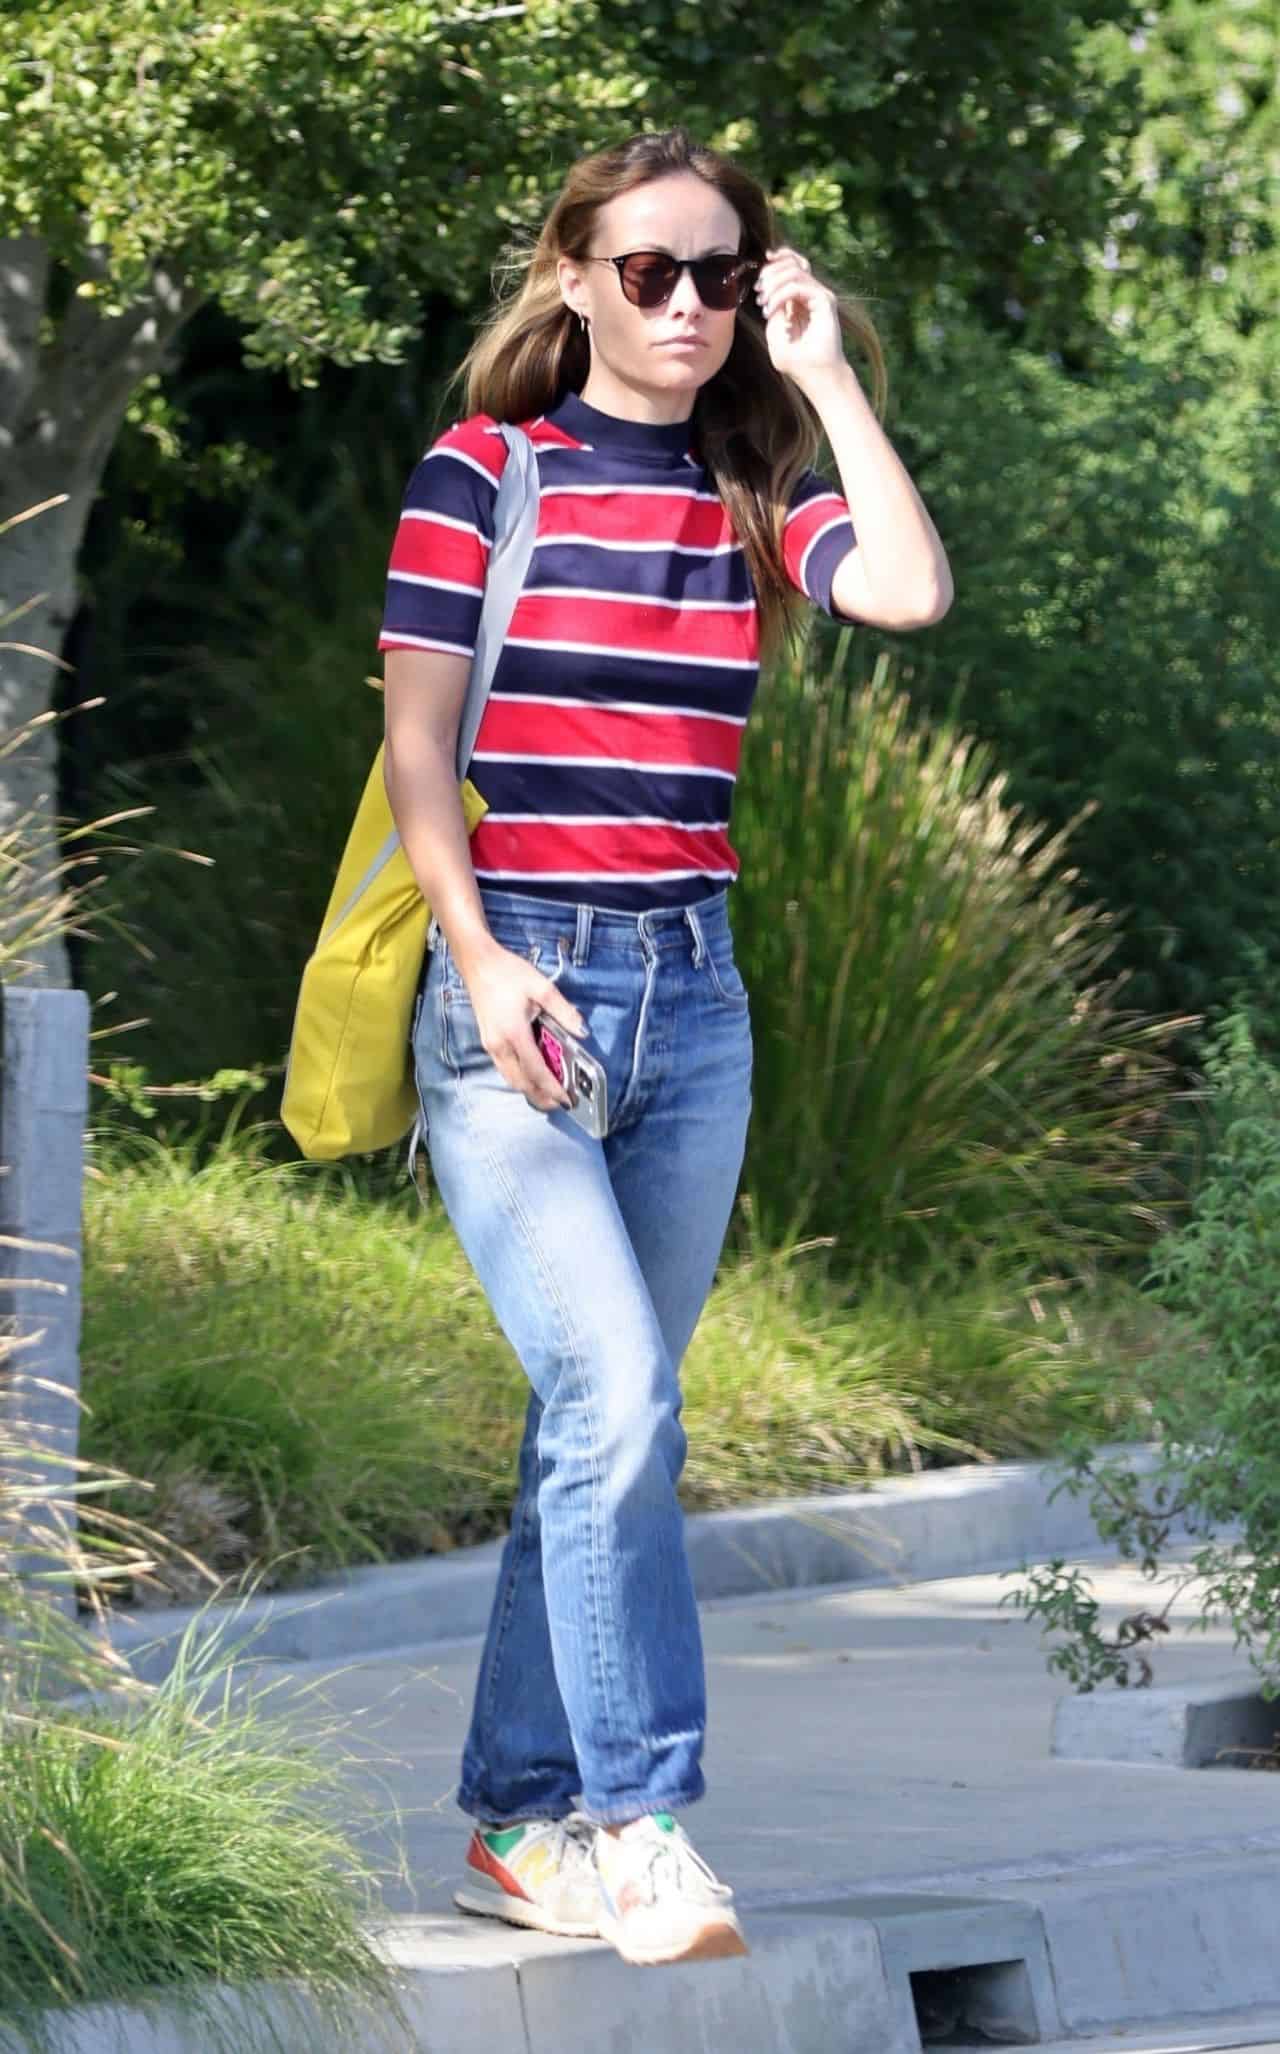 Olivia Wilde Rocks a Red and Navy Striped T-shirt After Meeting in LA